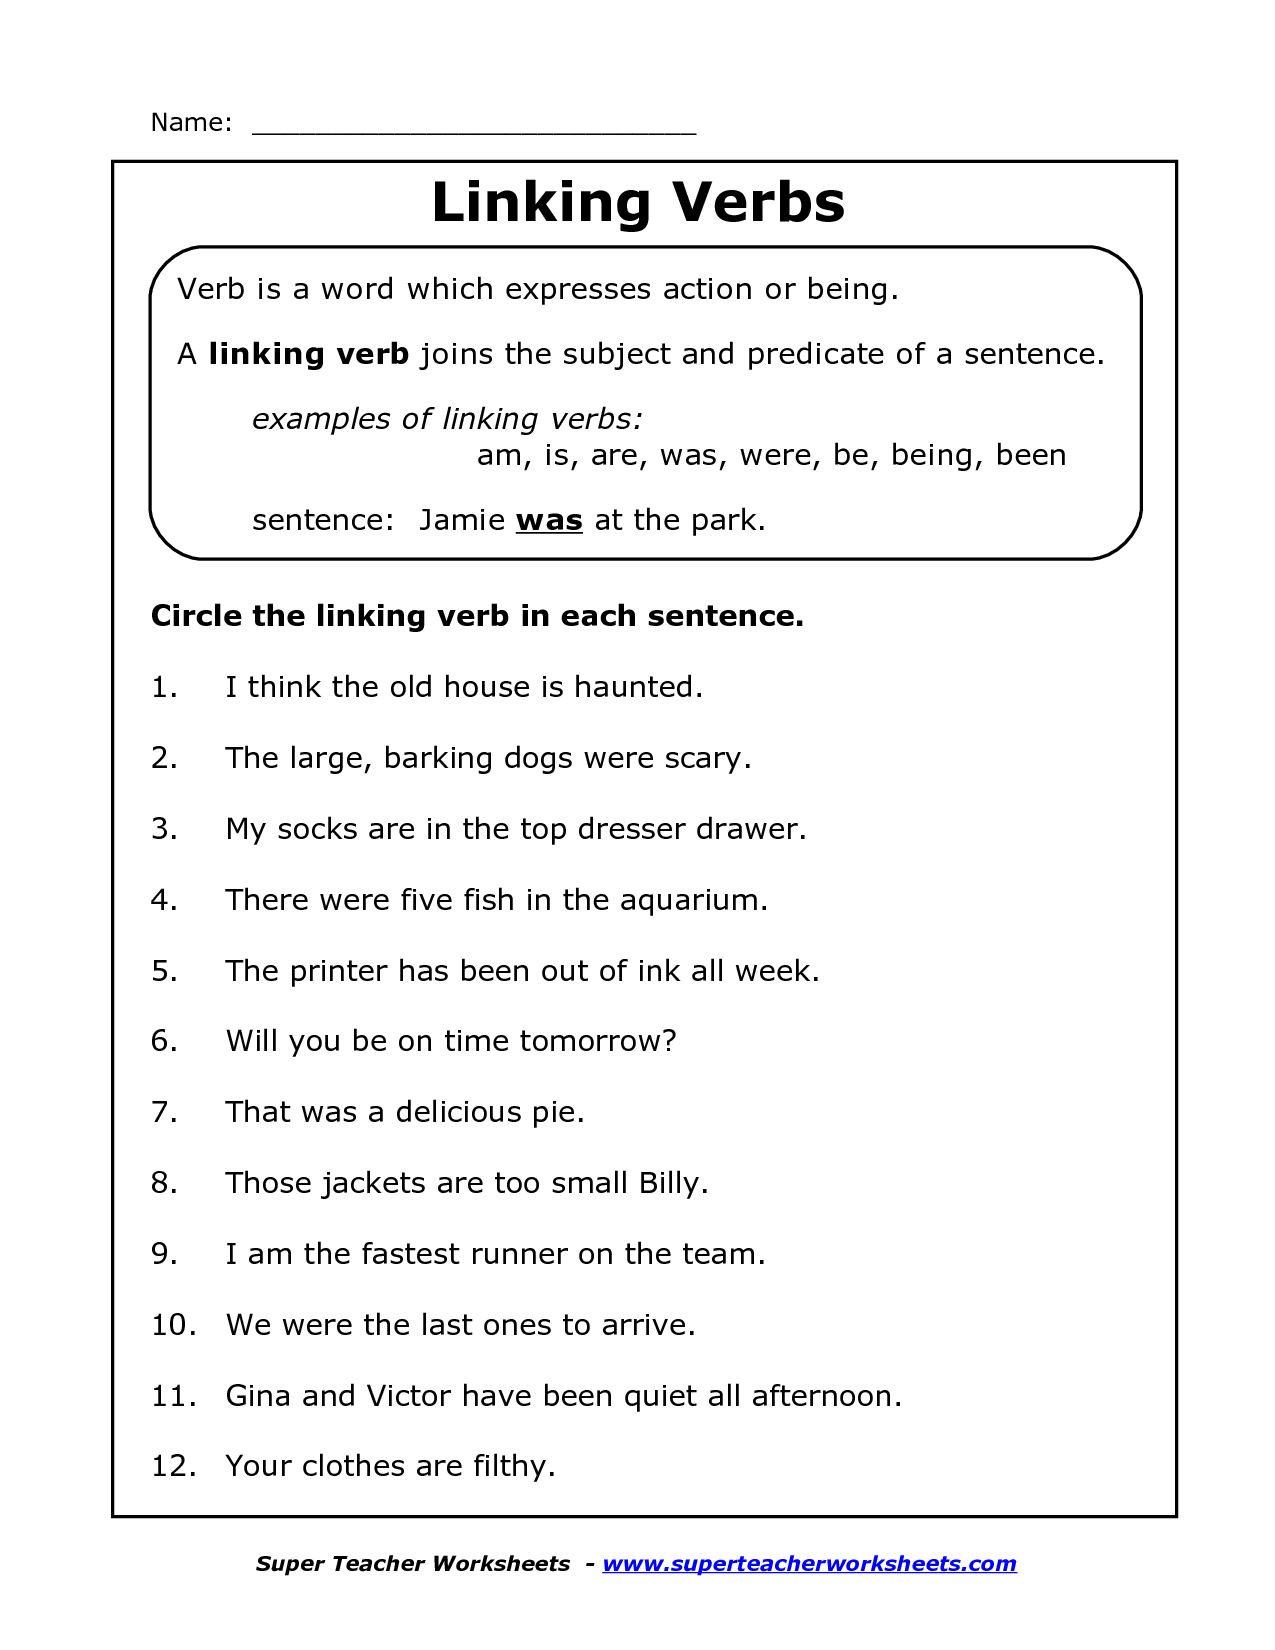 Worksheets On Verbs For 7Th Grade - Google Search | Projects To Try - Free Printable Linking Verbs Worksheets